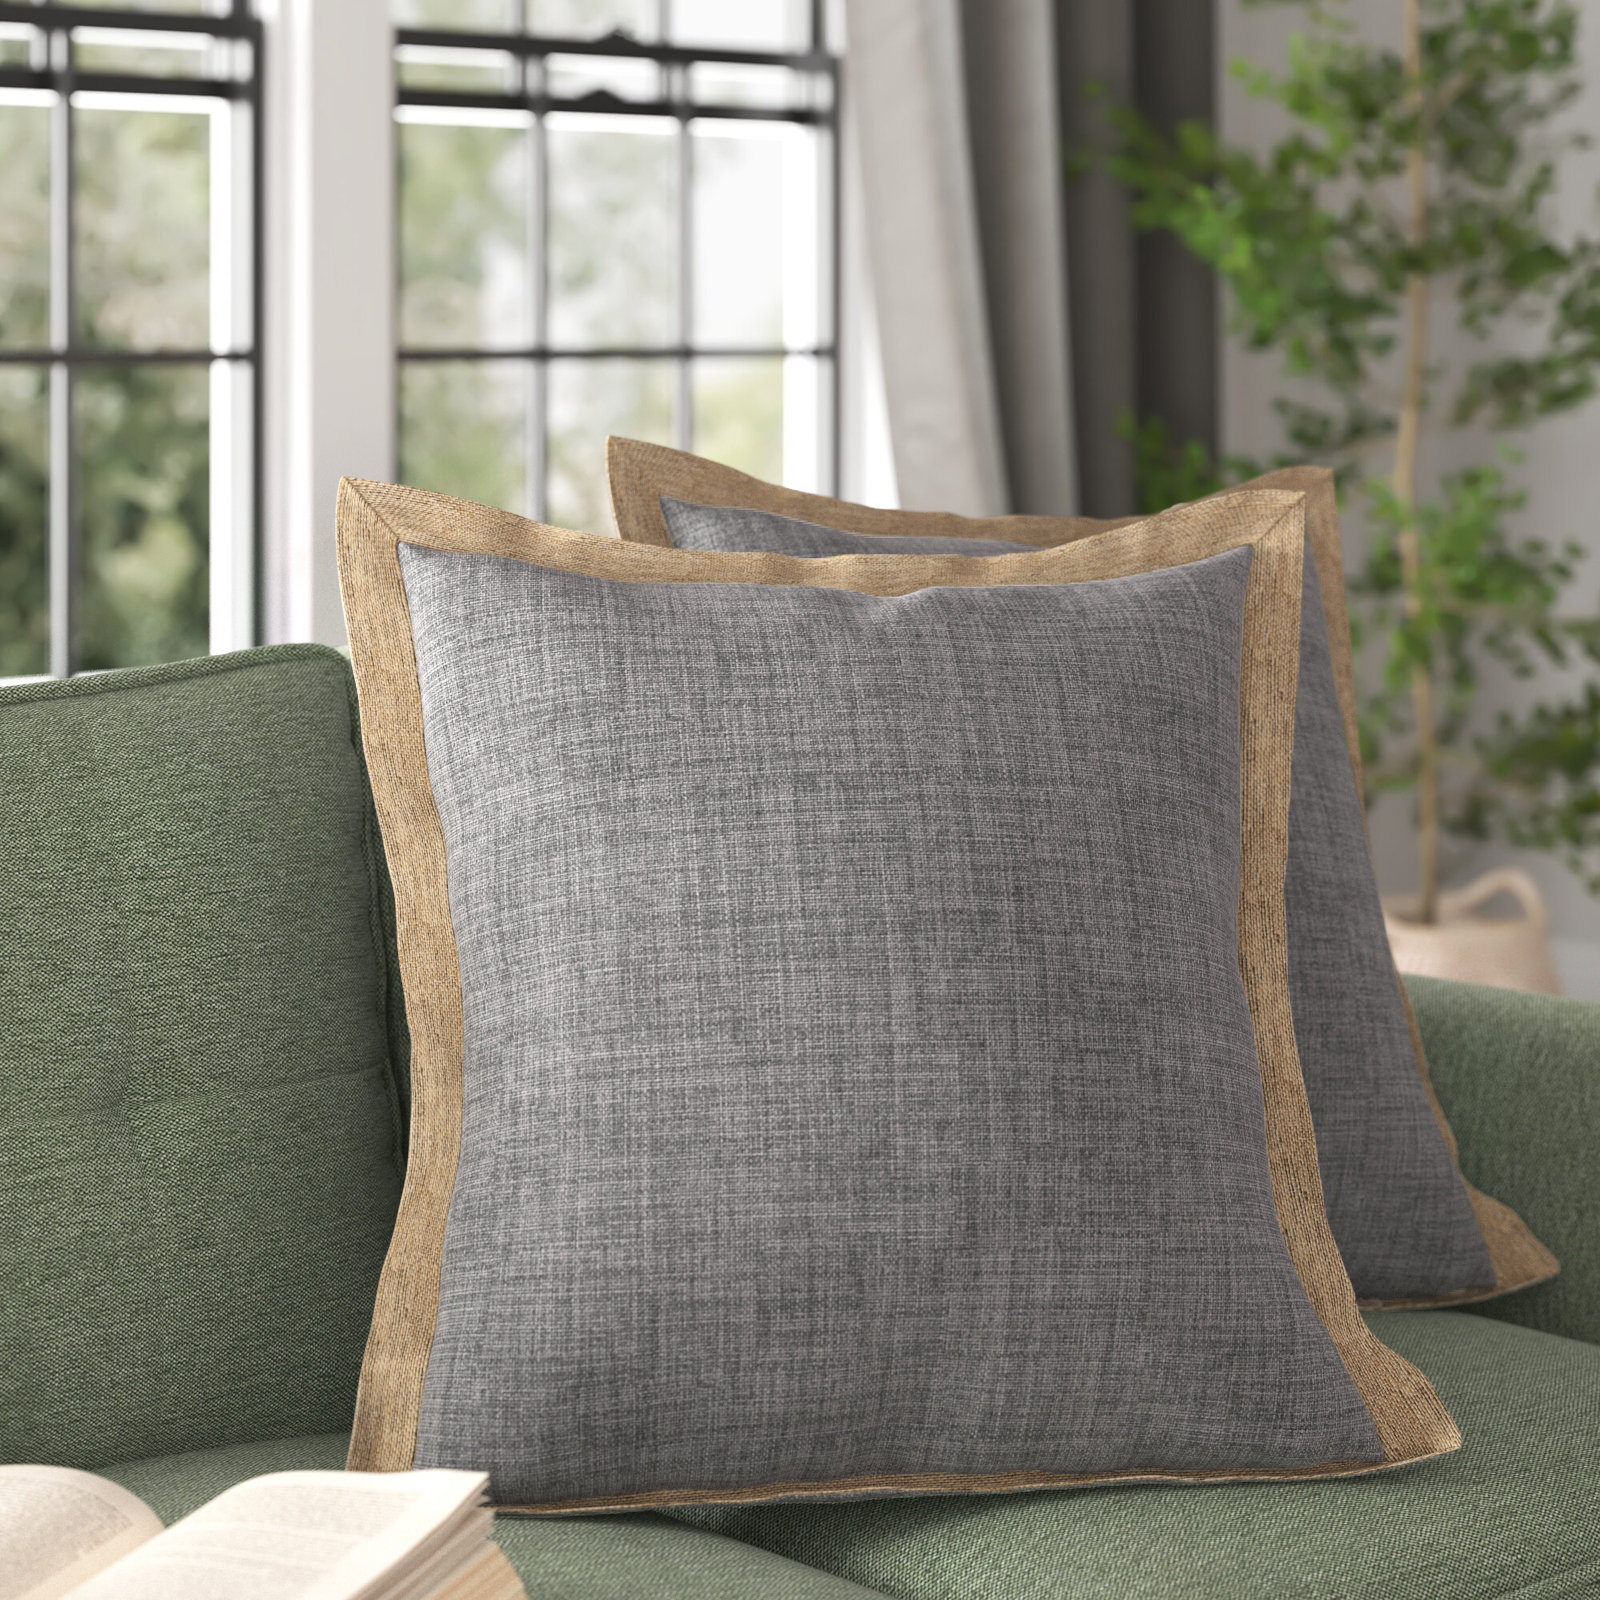 Throw Pillow Covers 20x20 - Decorative Pillows for Couch Set of 2 Rustic  Linen Cushion Cover with Tassels Large Accent Pillowcase for Bedding Home